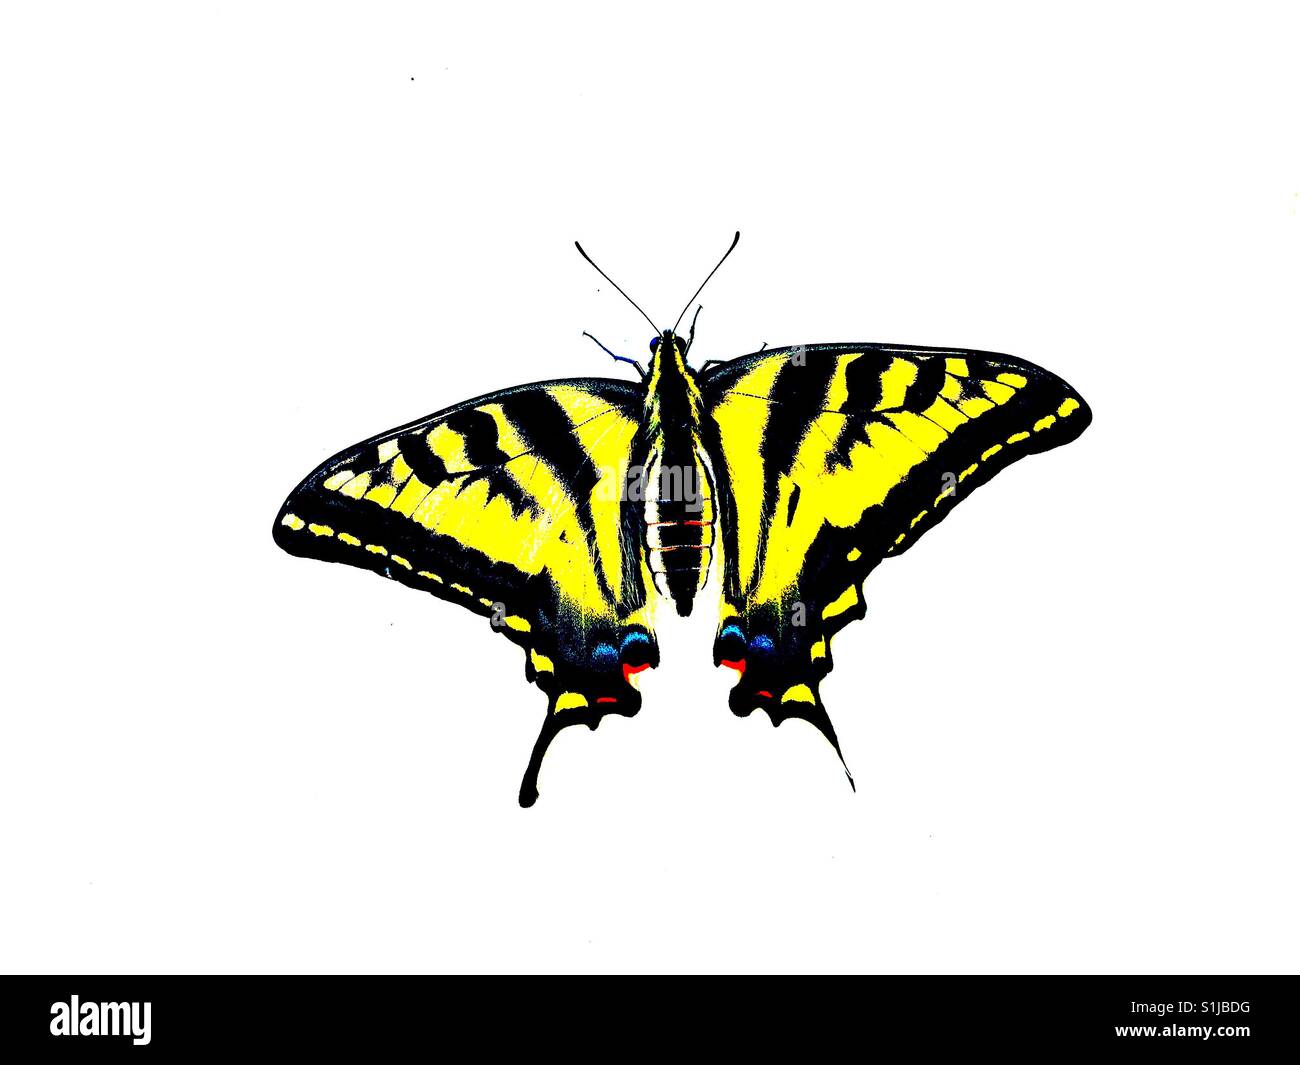 Western Swallowtail Butterfly on a white background. Art edit. Stock Photo